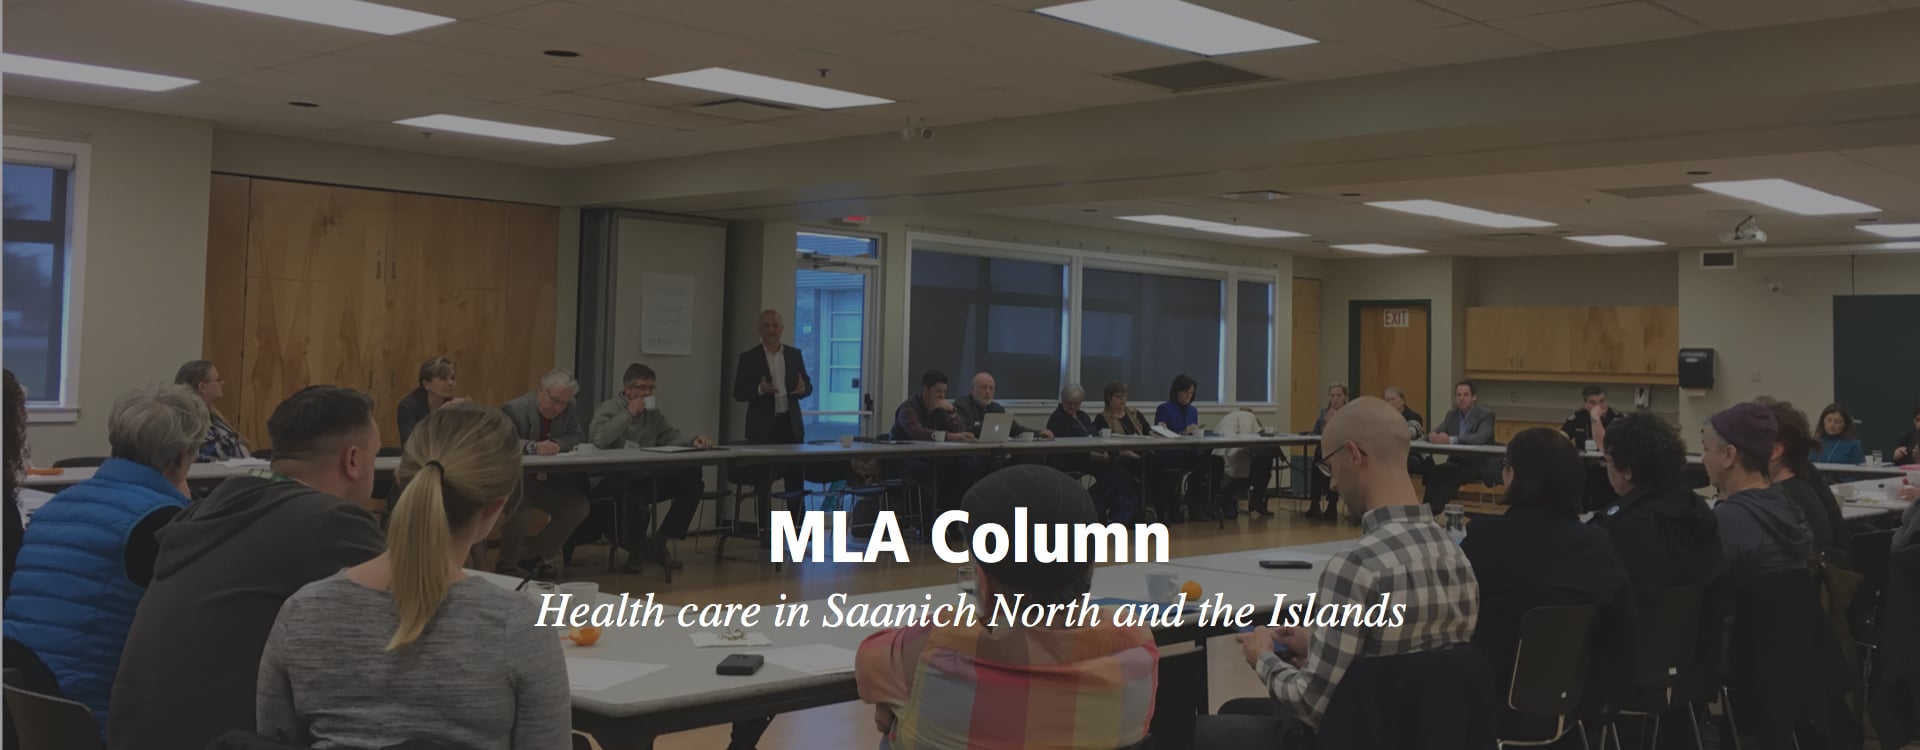 MLA Column: Health care in Saanich North and the Islands